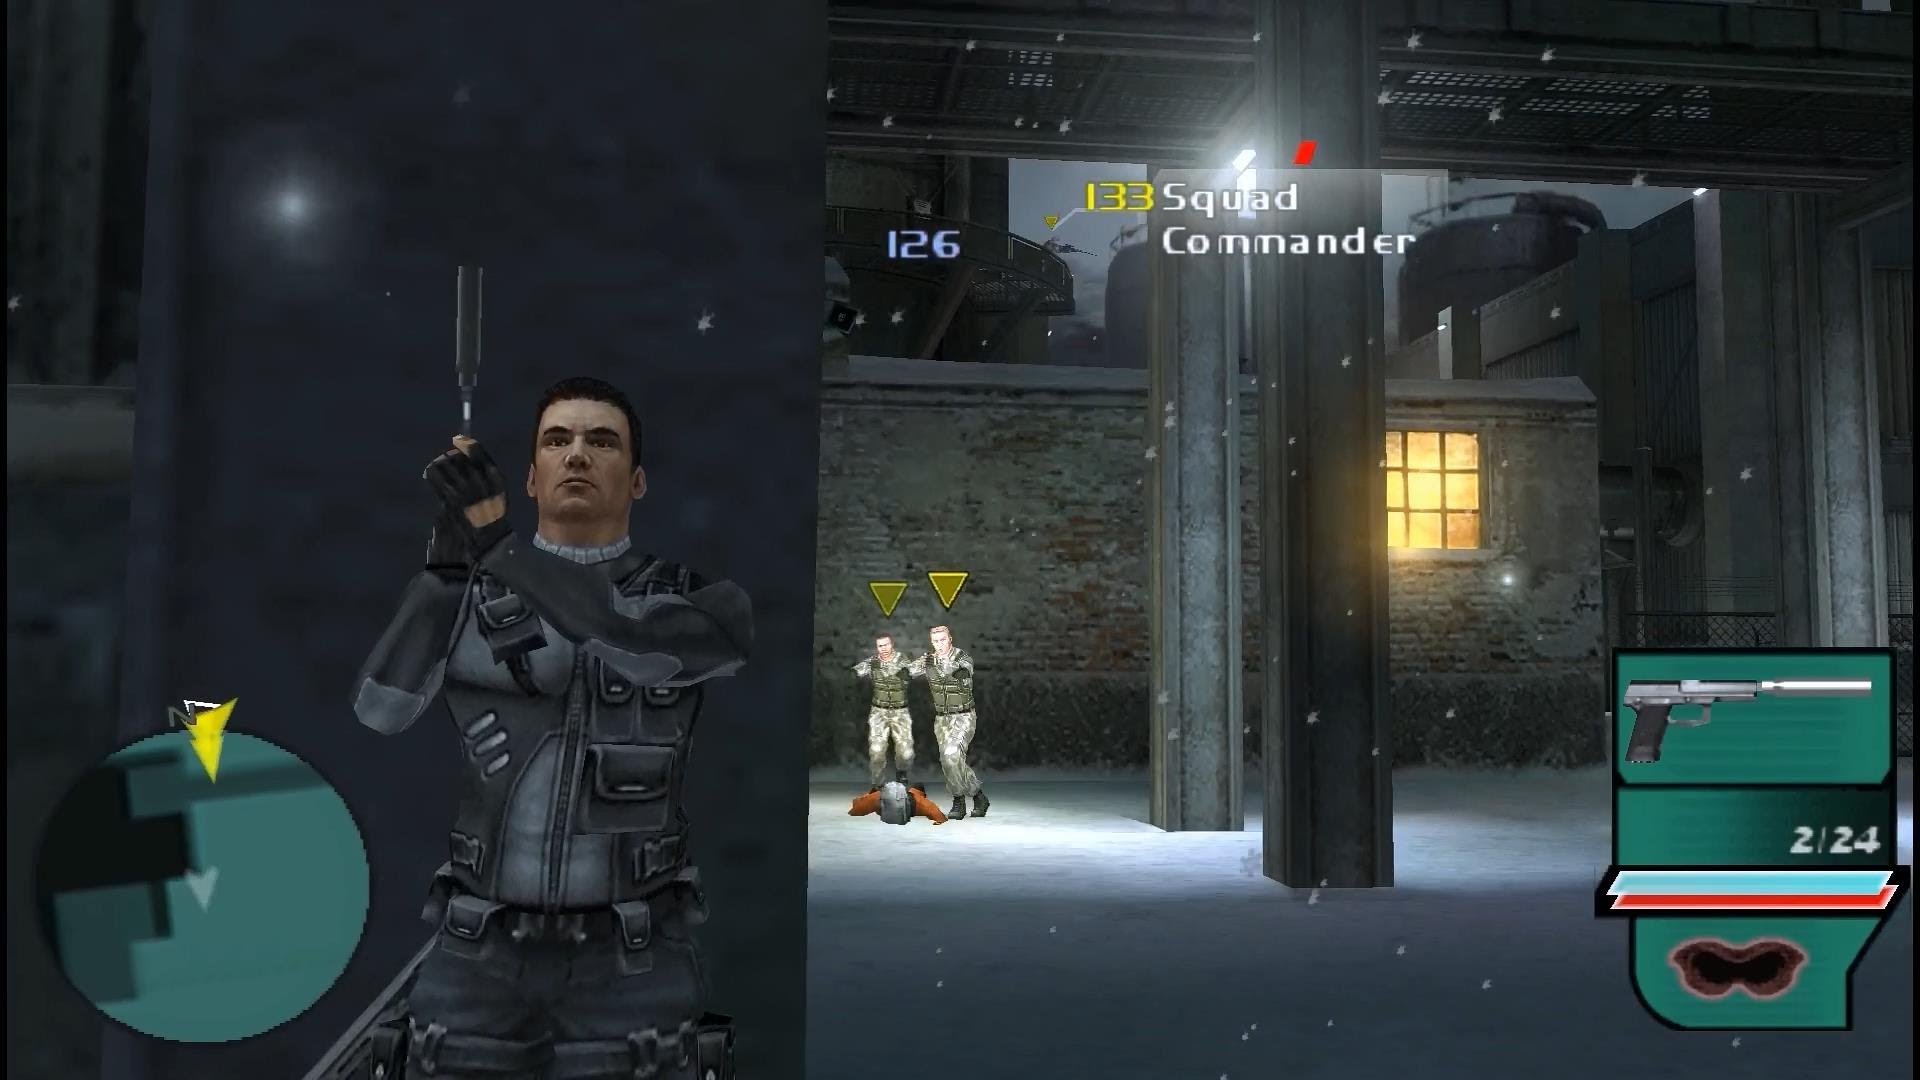 Syphon Filter Pics, Video Game Collection